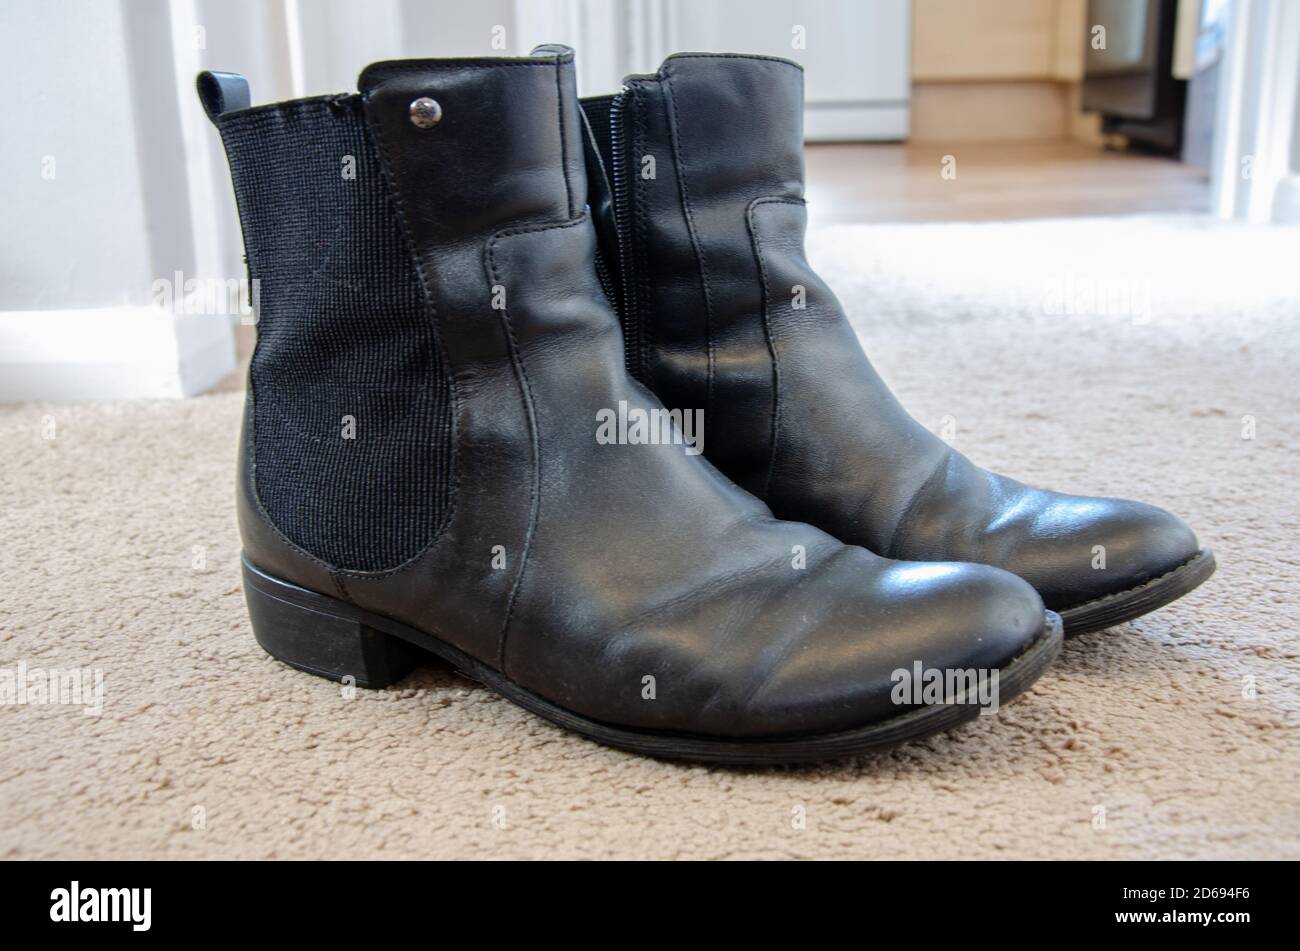 A pair of ladies' black leather ankle boots shot on a carpeted hallway floor. Stock Photo